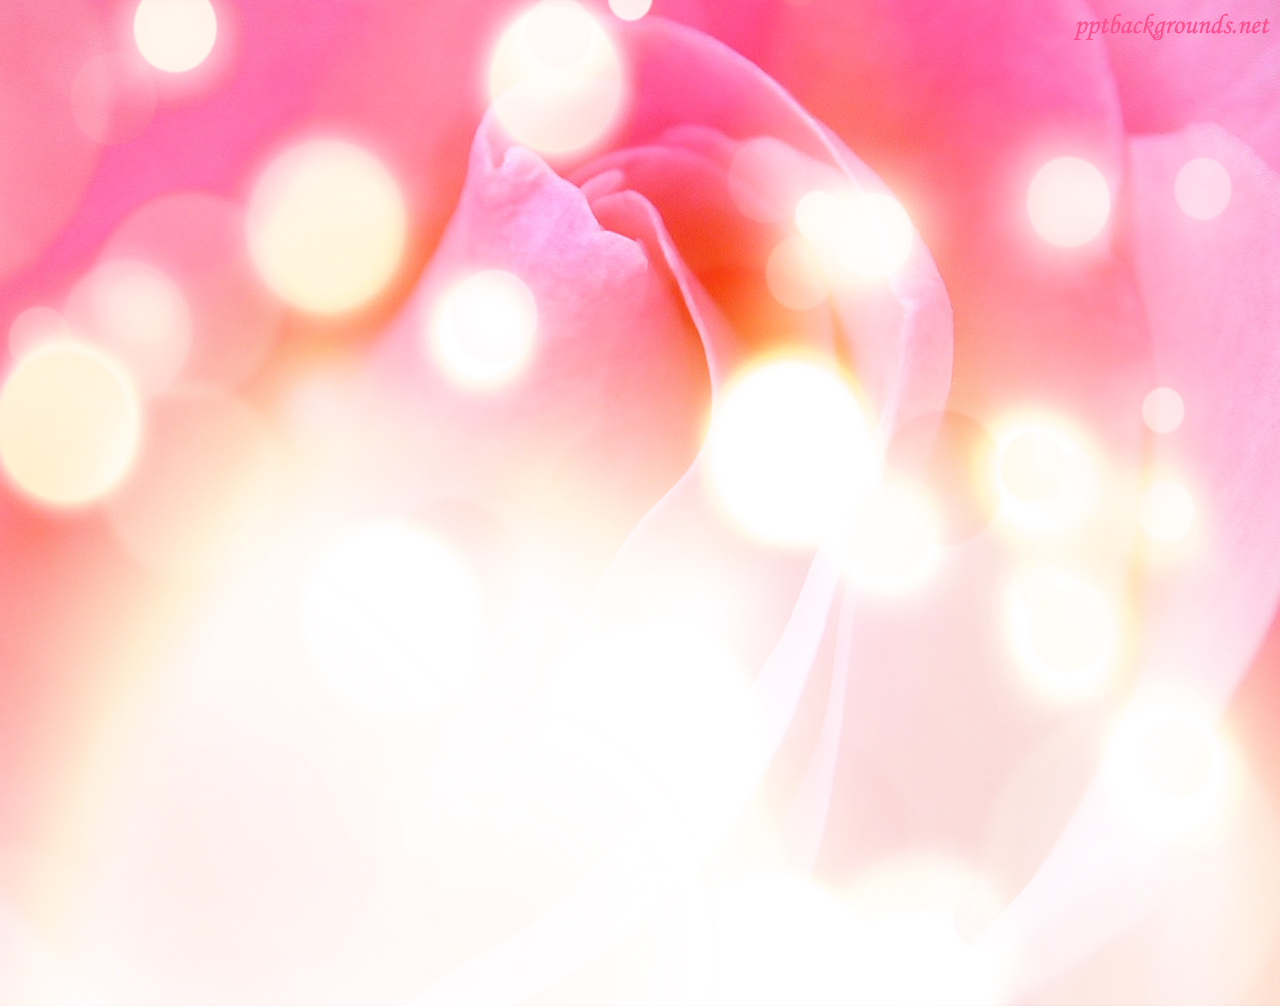 Free Blurry Lights With Rose Color Backgrounds For PowerPoint